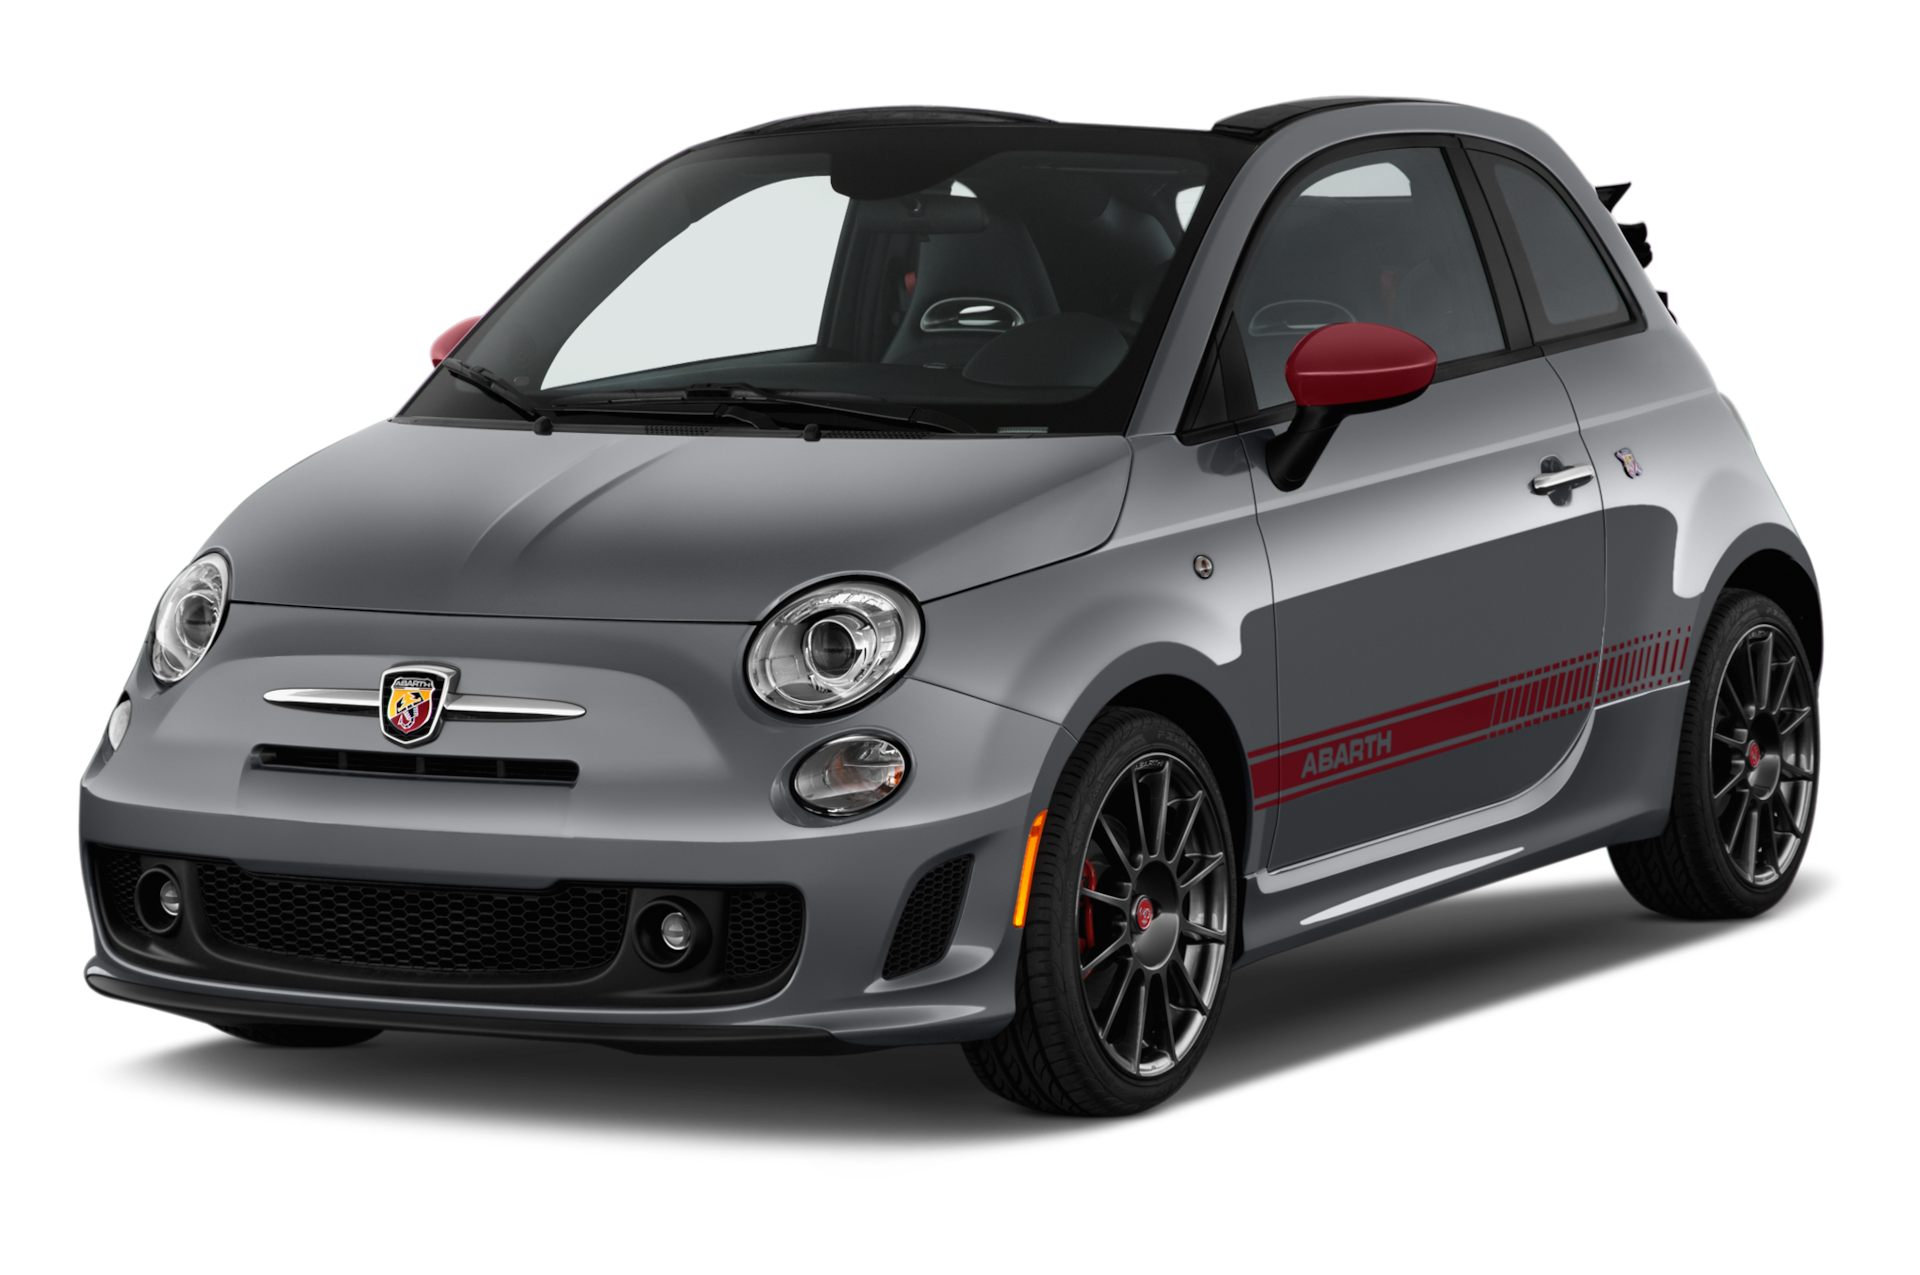 2017 FIAT 500C Prices, Reviews, and Photos - MotorTrend